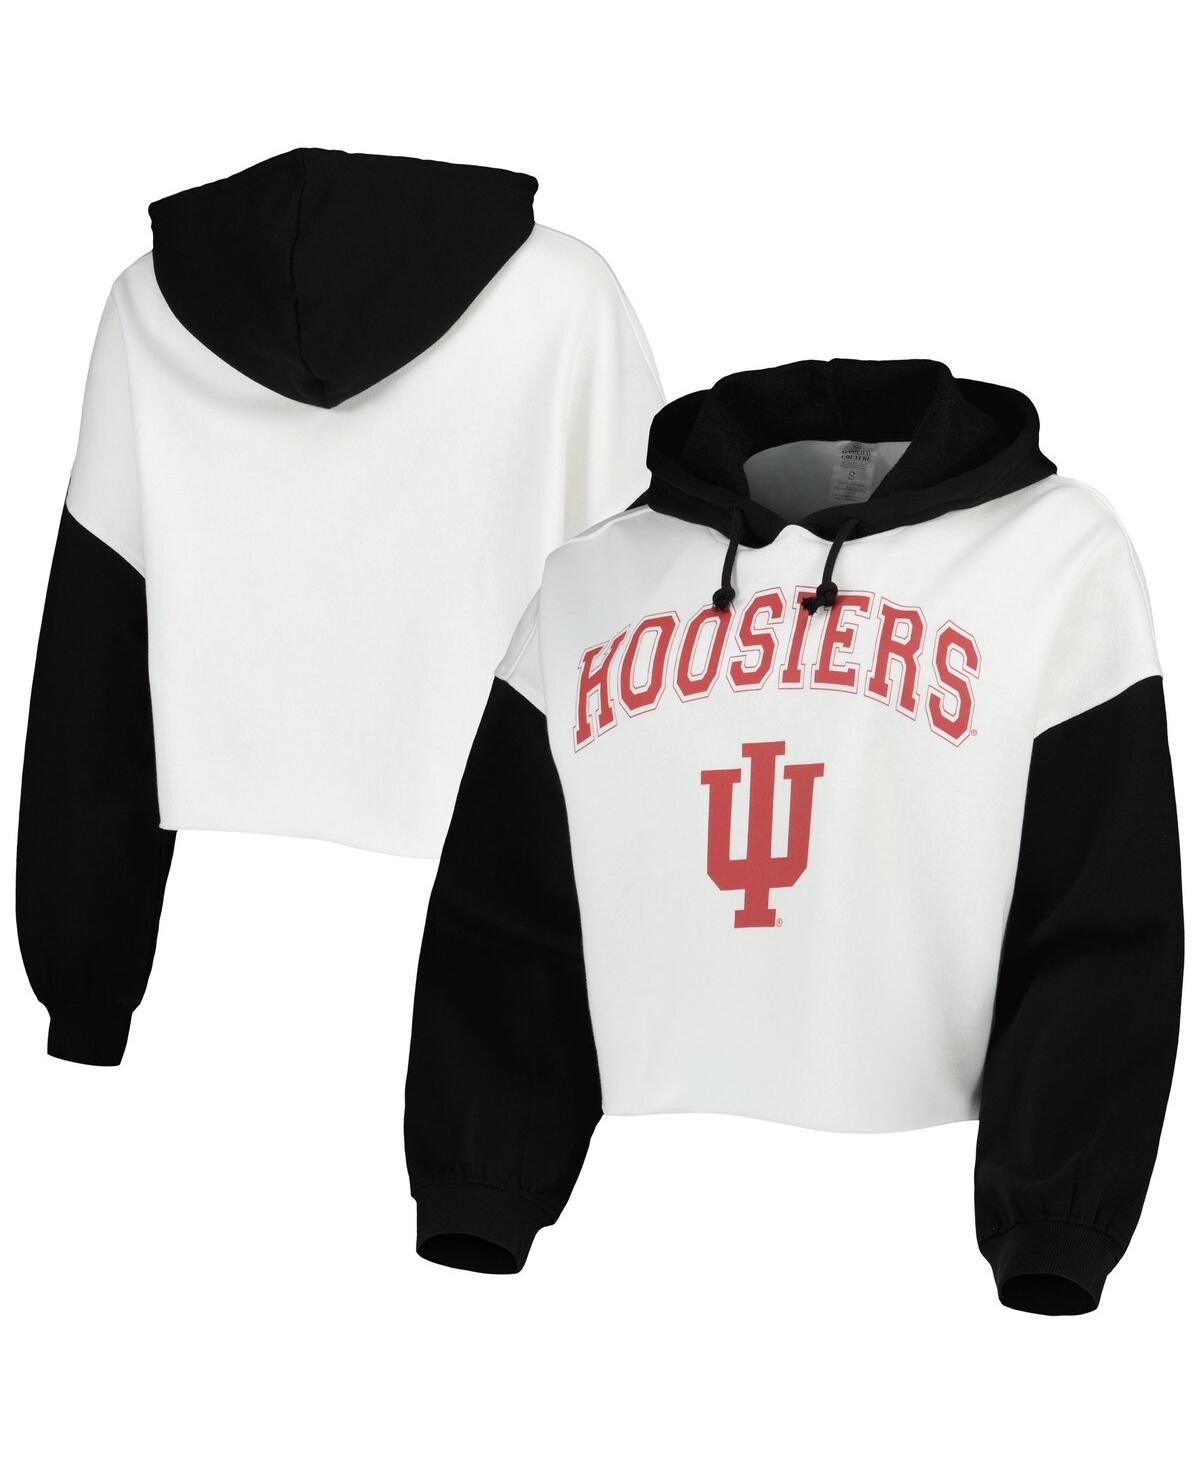 Women's Gameday Couture White and Black Indiana Hoosiers Good Time Color Block Cropped Hoodie - White, Black